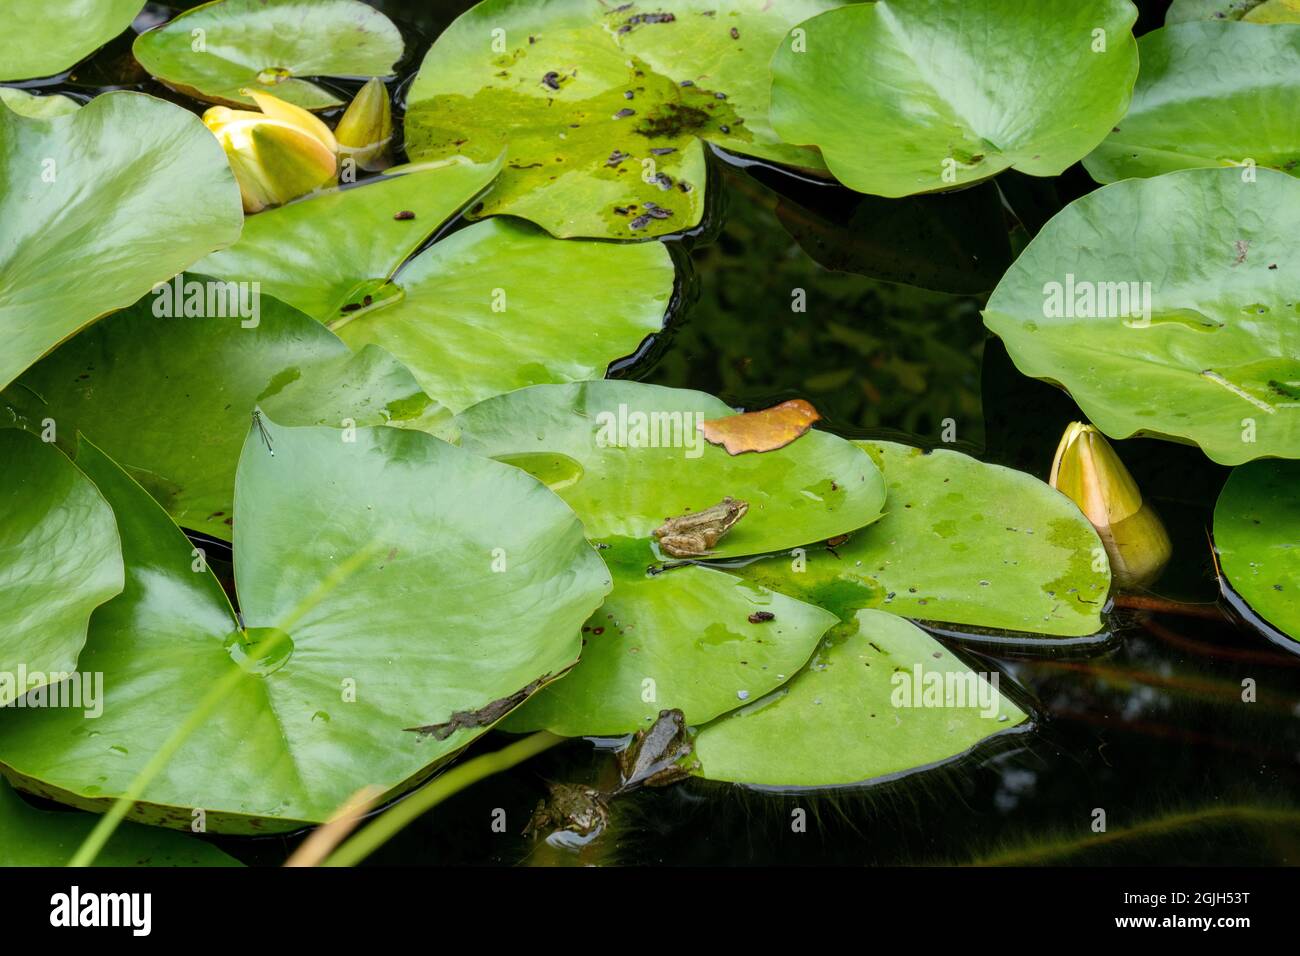 Boothbay Harbor, Maine, USA.  Coastal Maine Botanical Gardens.  Yellow Water Lily (Nymphea mexicana) with Green Frog (Lithobates clamitans) Stock Photo